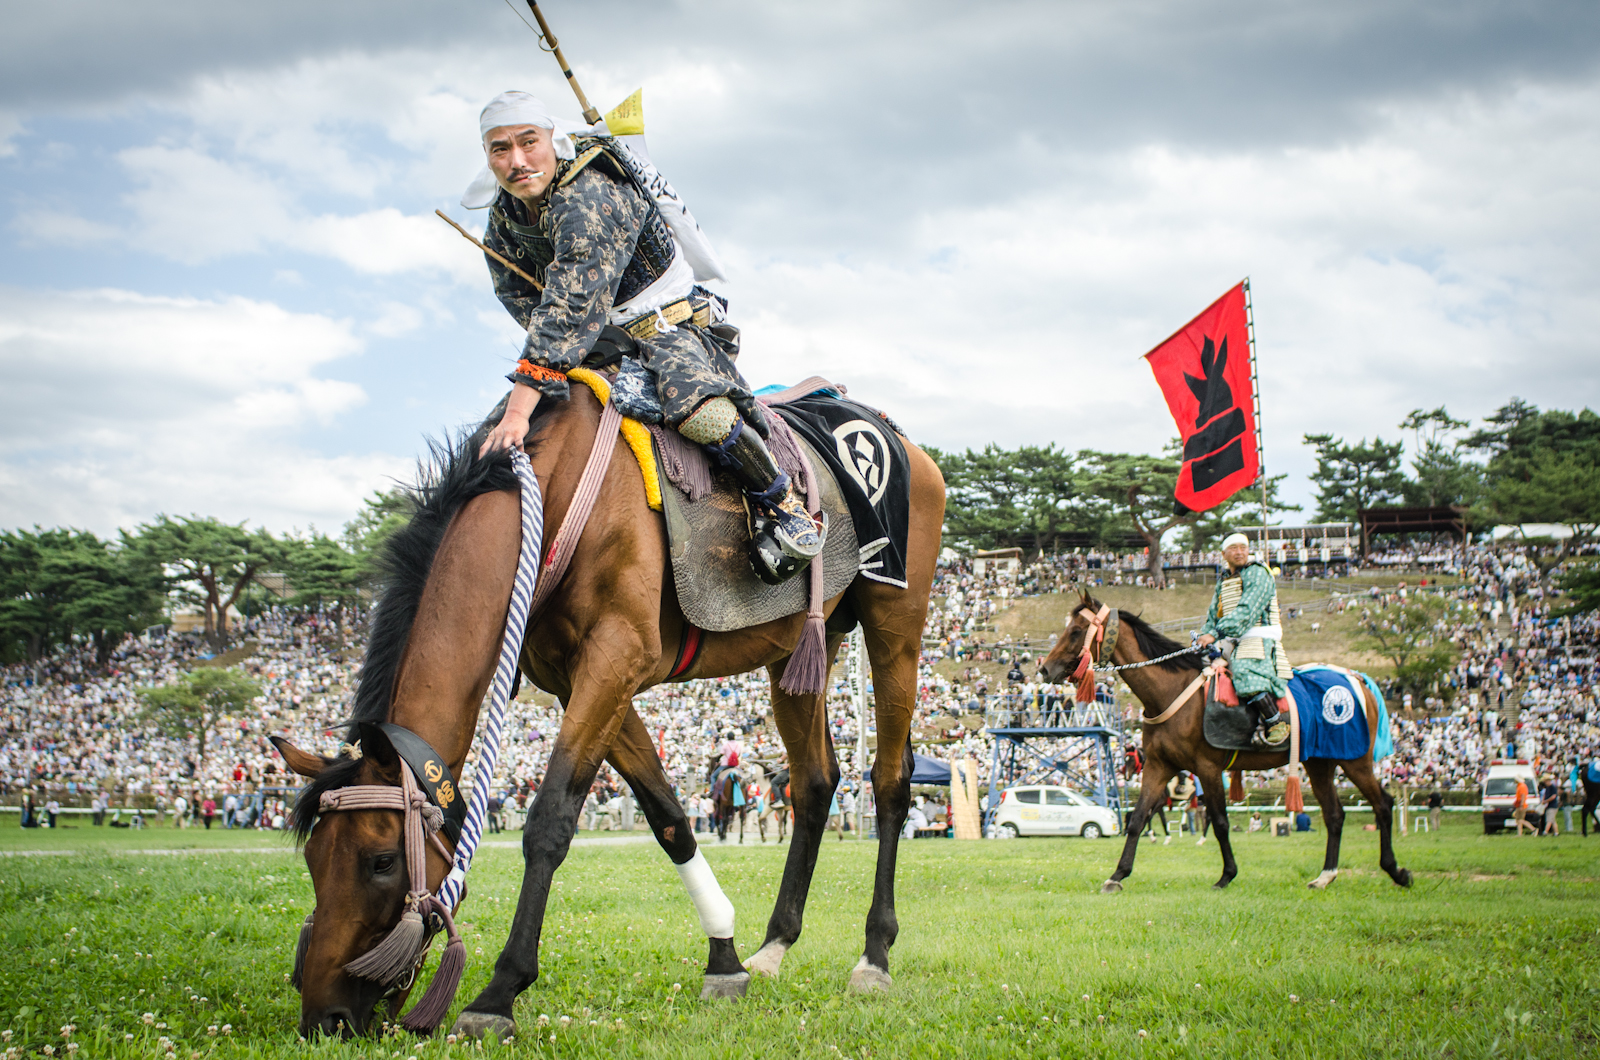 Samurai warriors wait on their horses before competing in traditional games